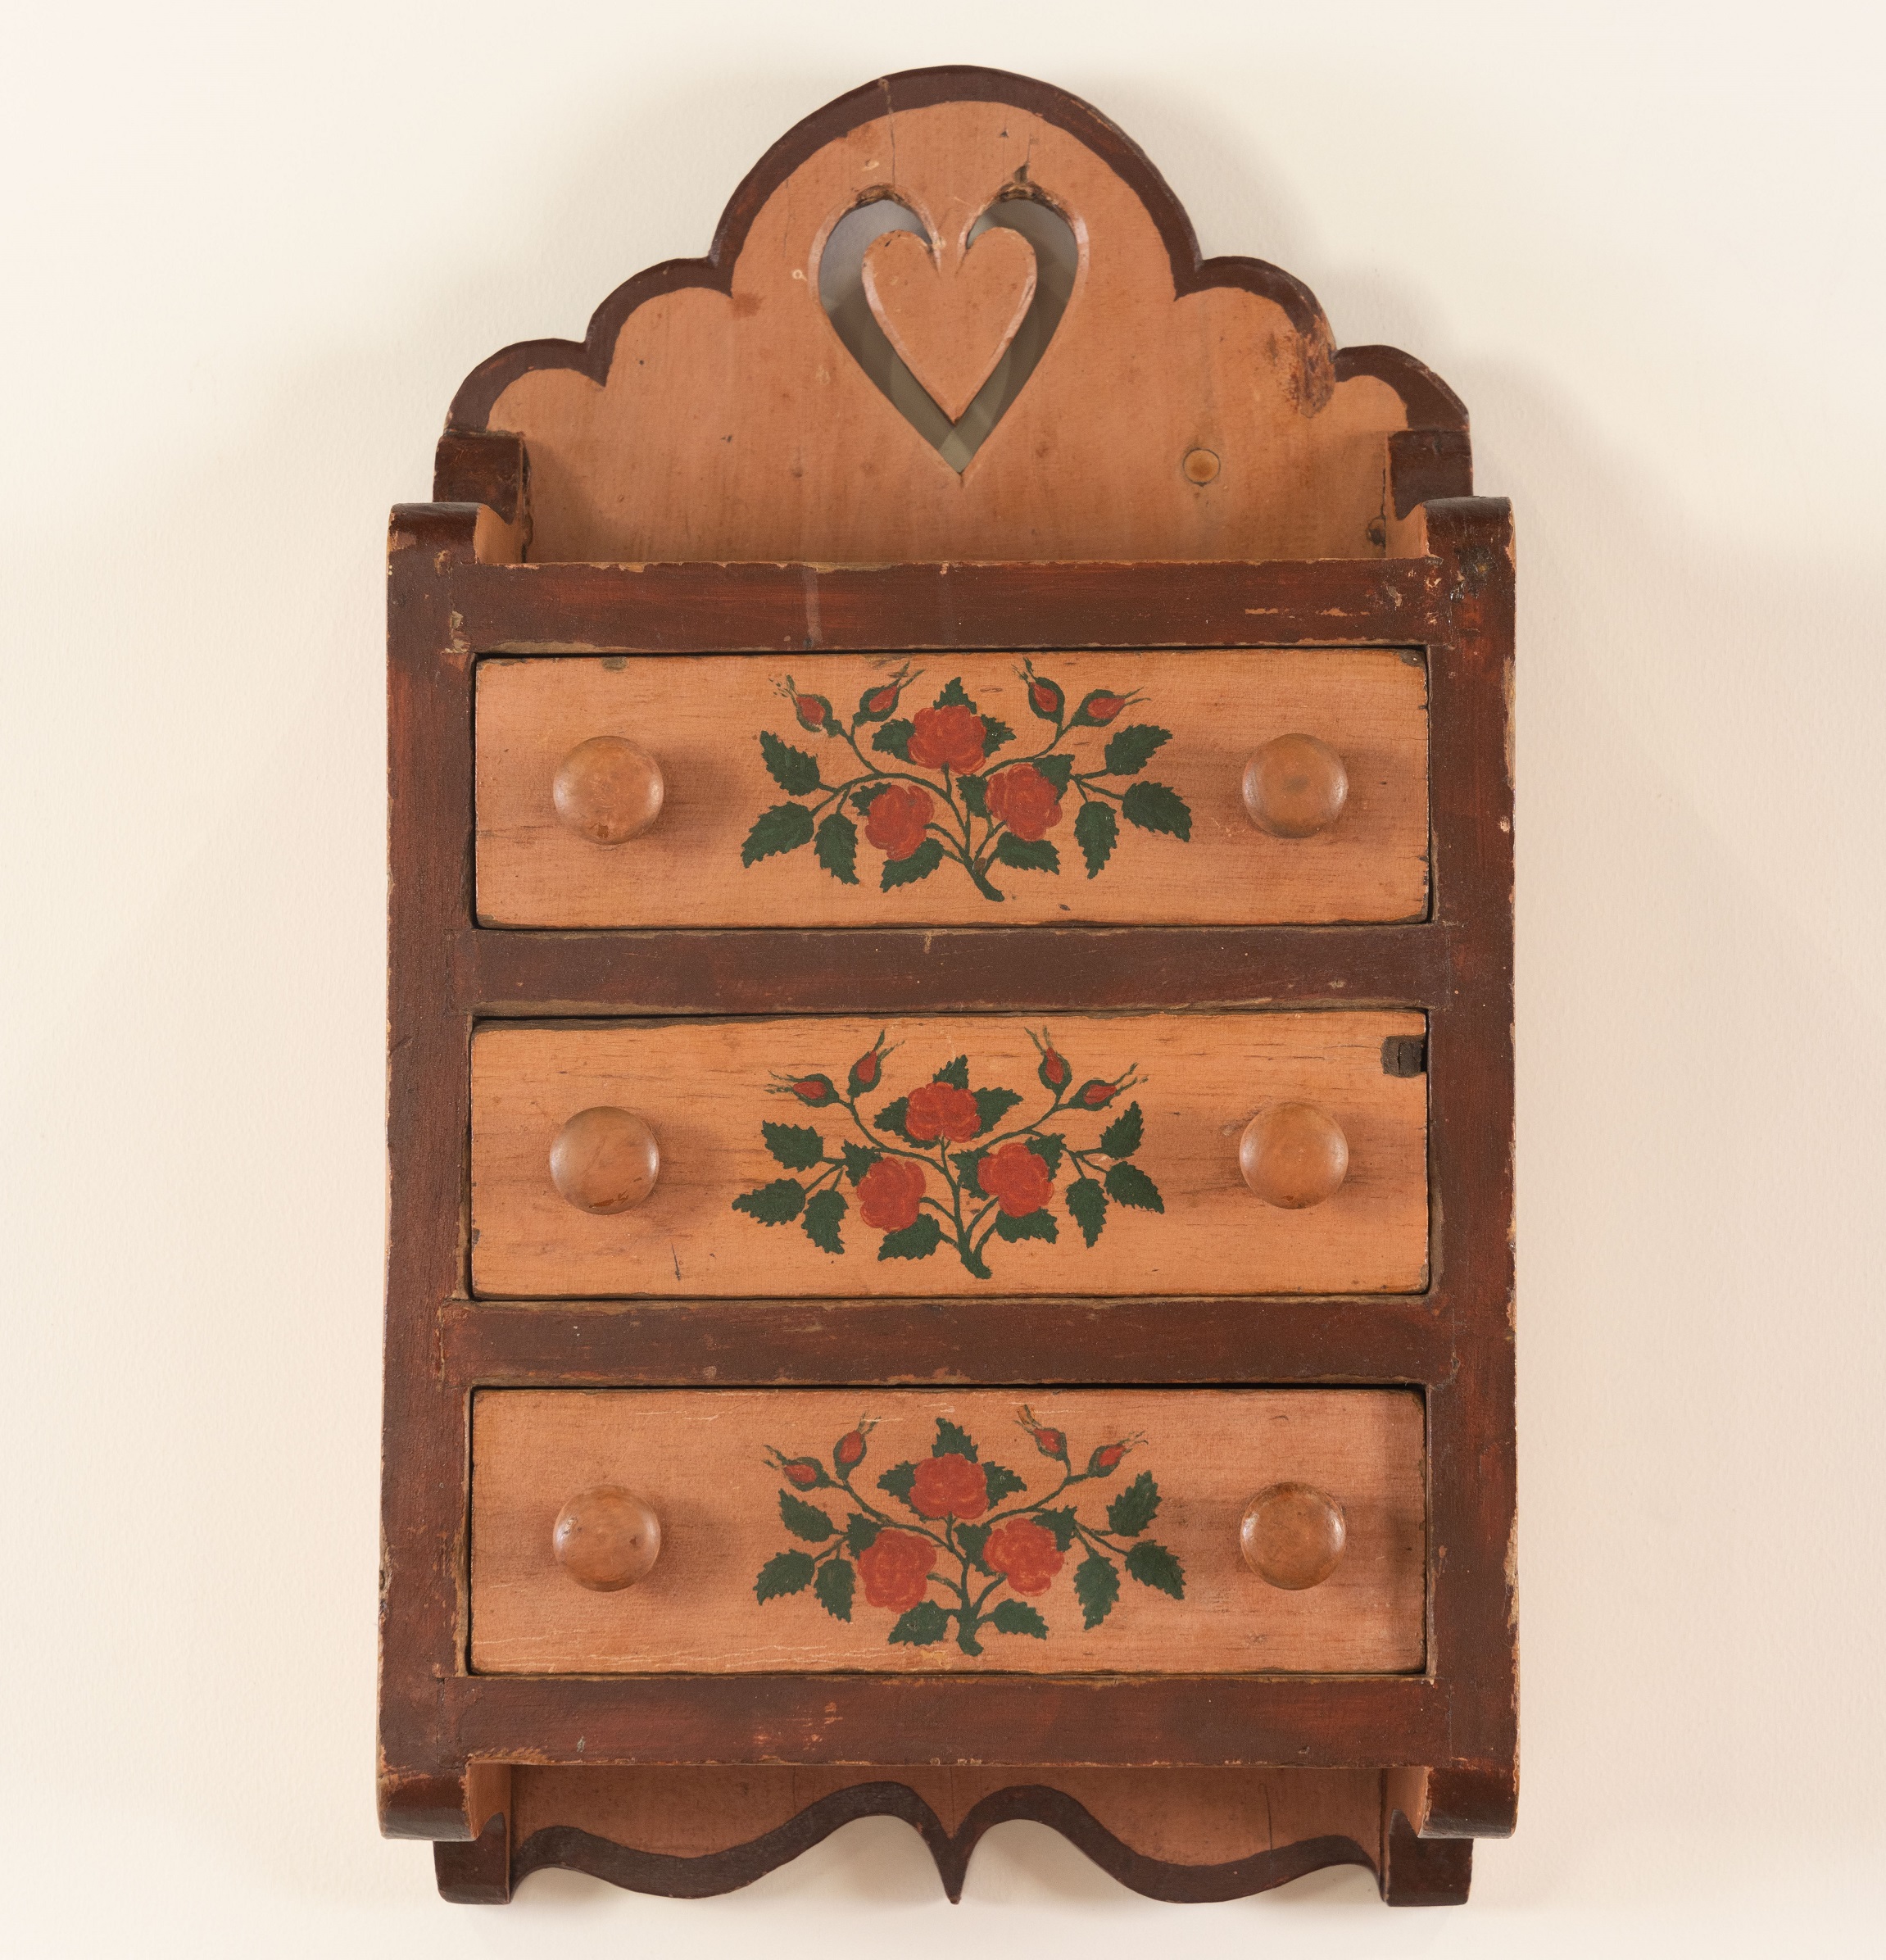 hanging painted spice chest rel=